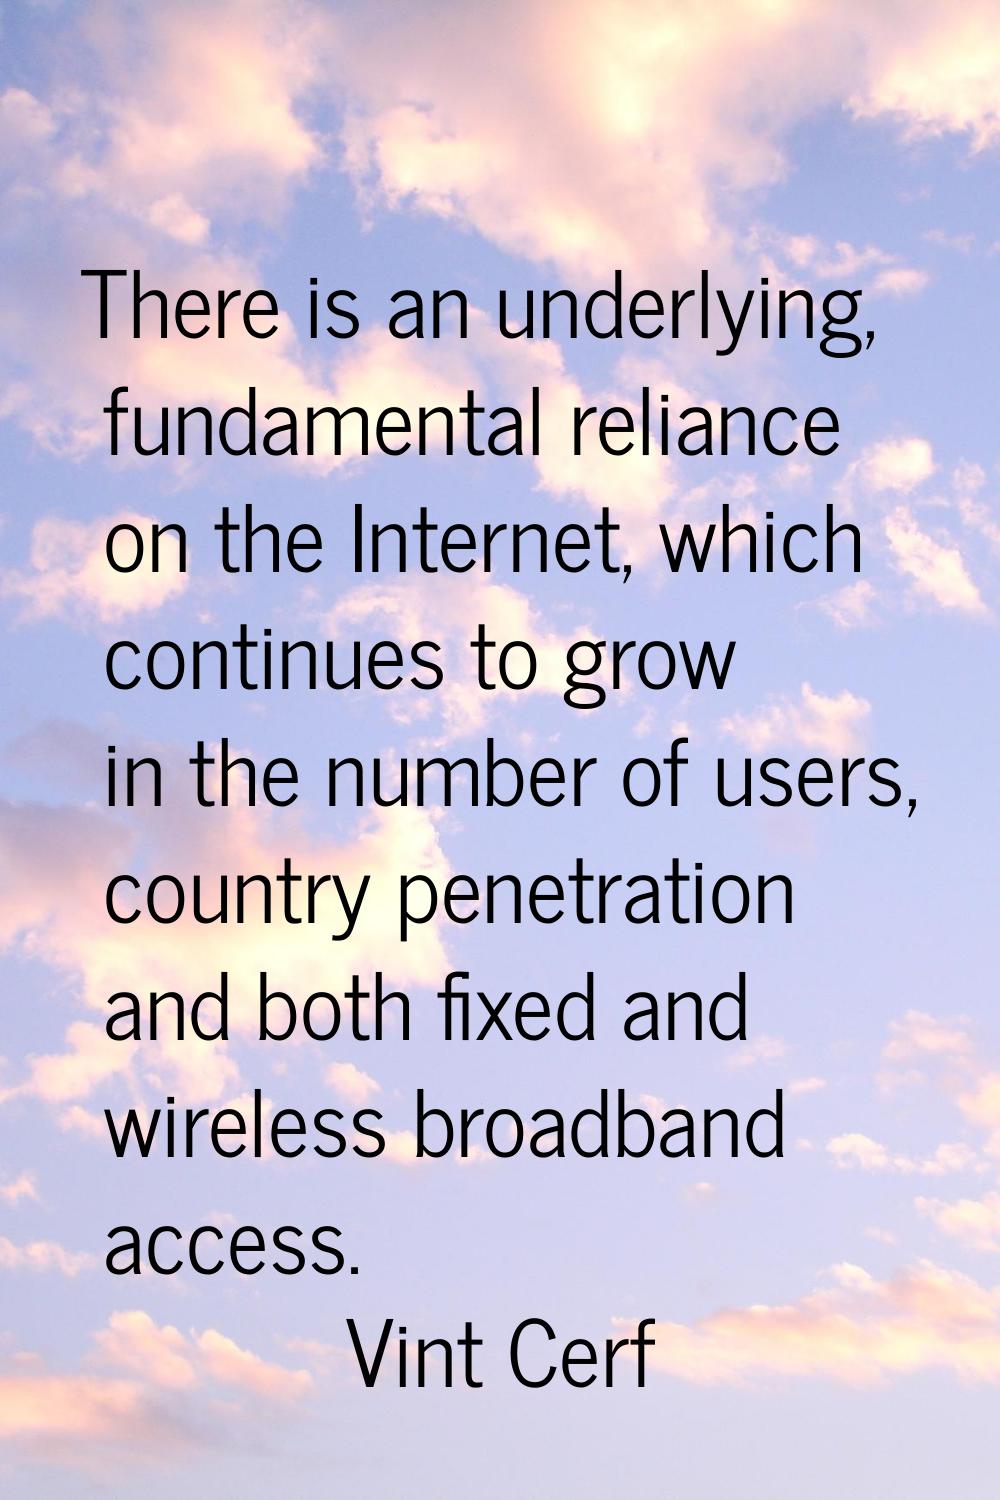 There is an underlying, fundamental reliance on the Internet, which continues to grow in the number